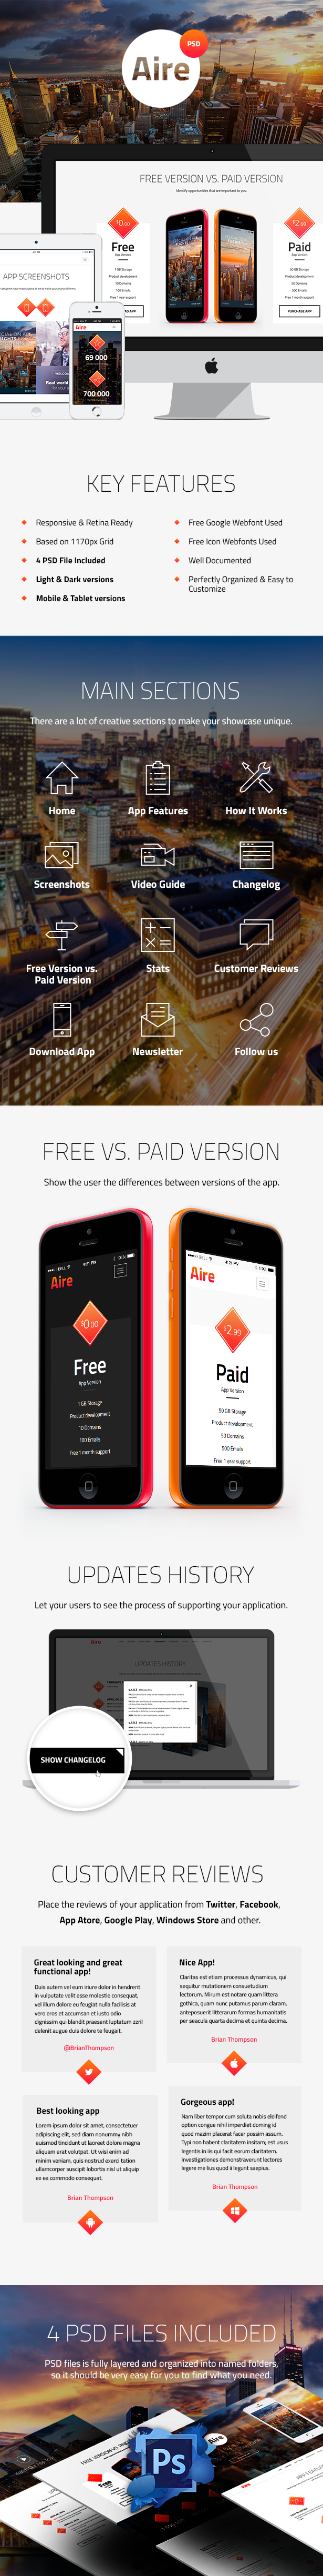 Aire - App Landing Page PSD Template - 3